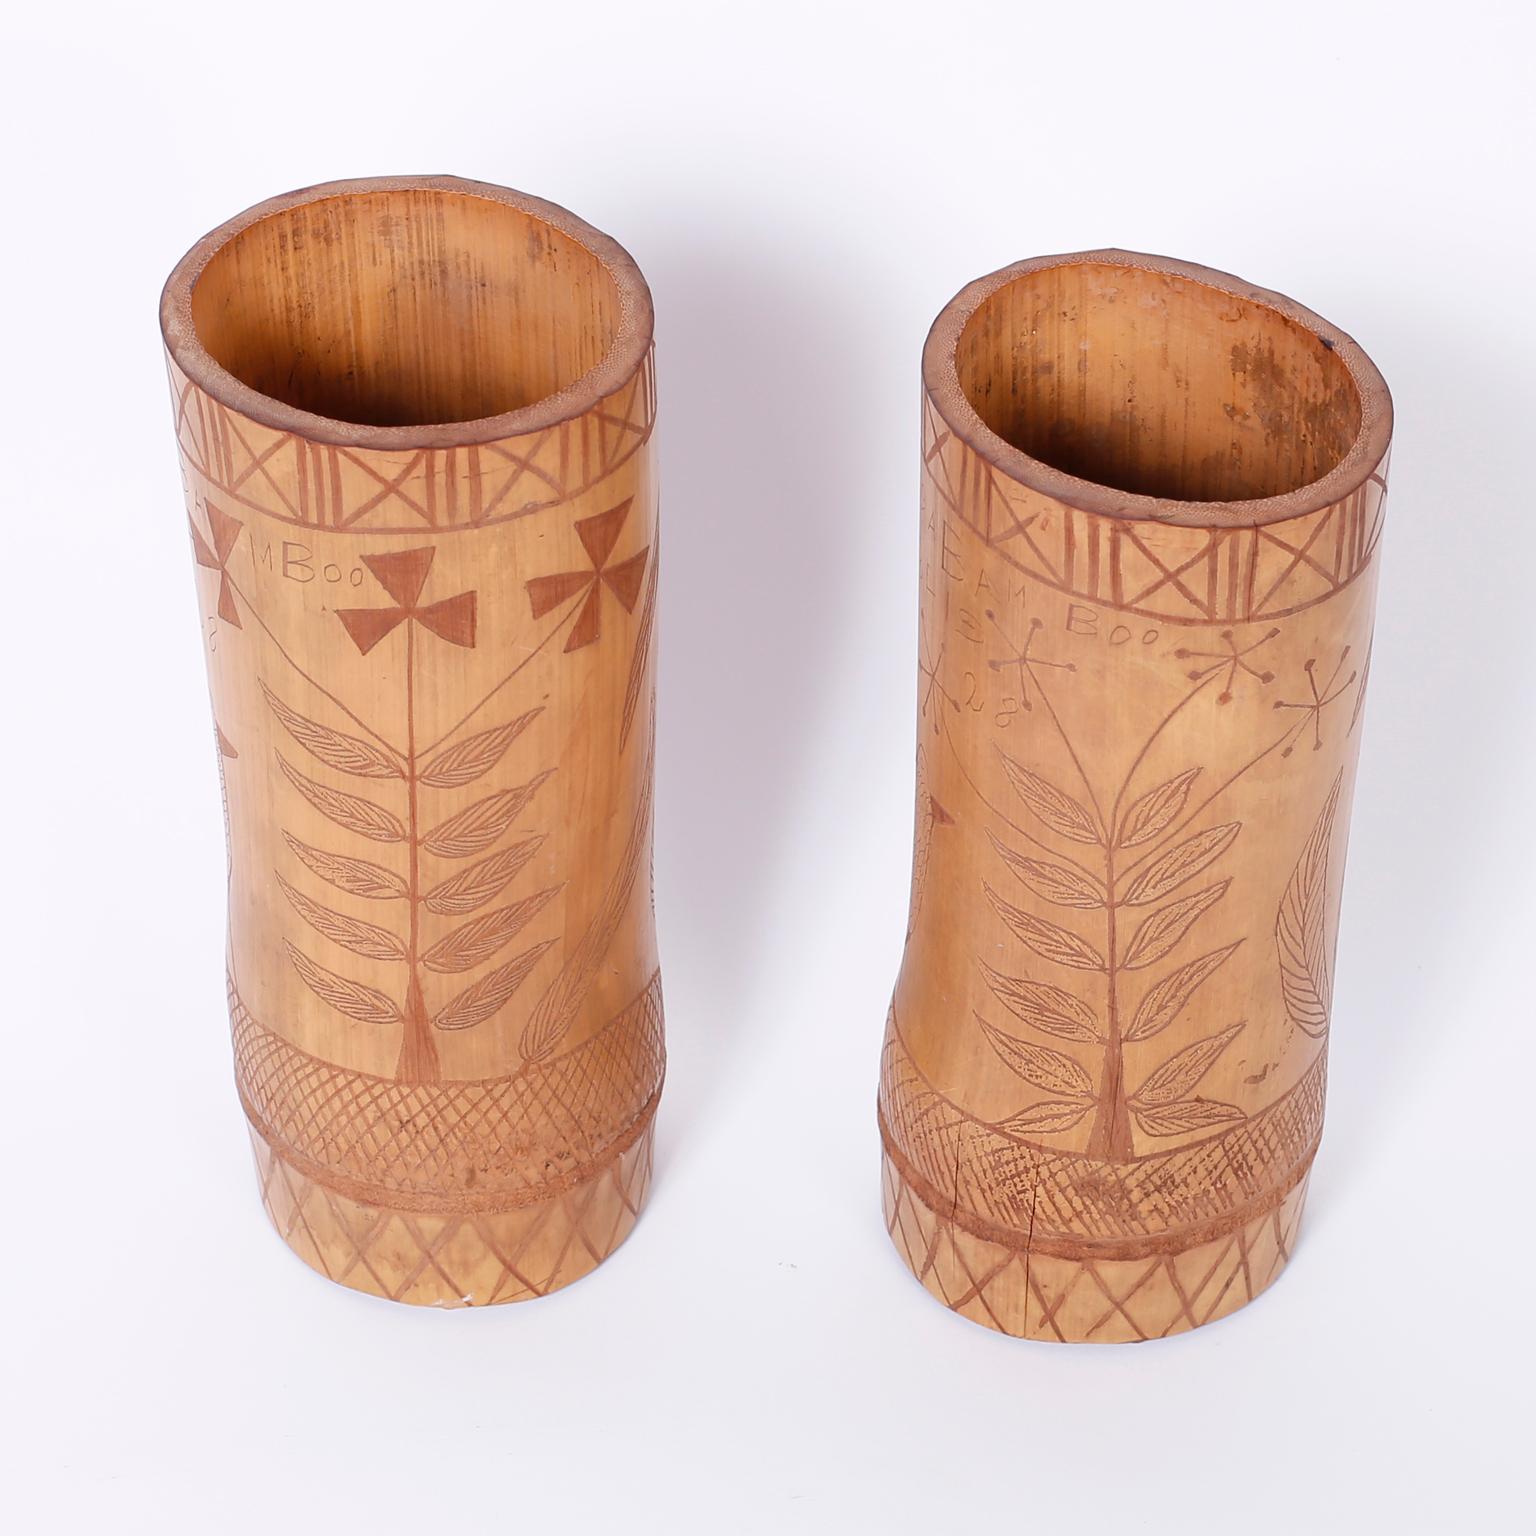 bamboo vases for sale